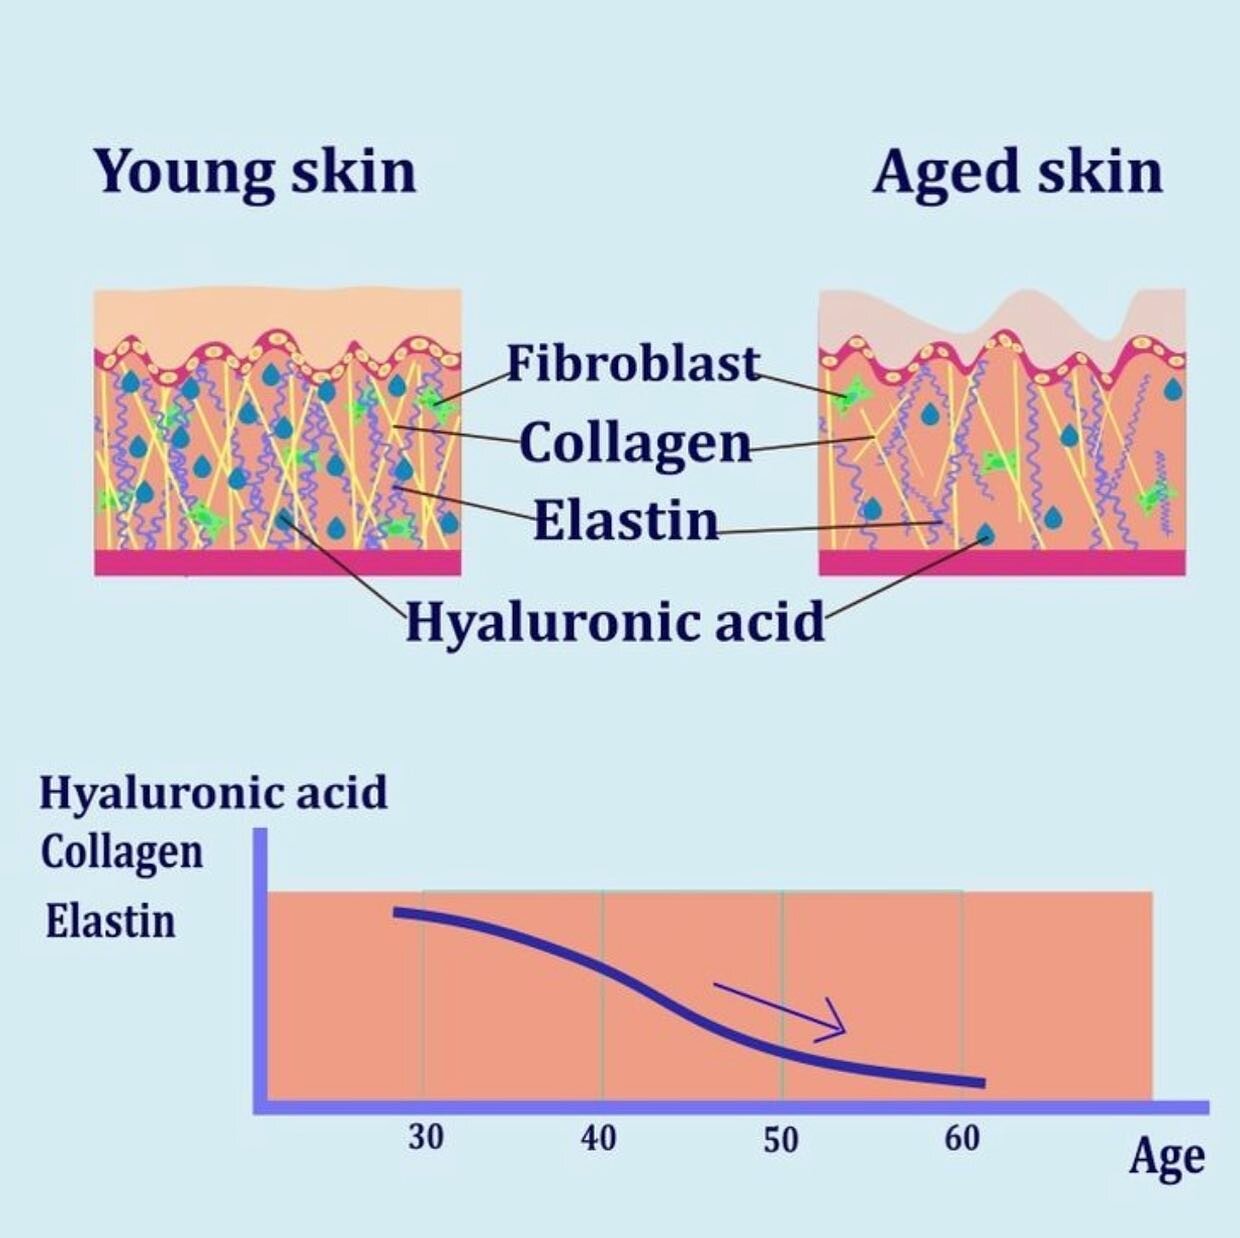 Microneedling aka collagen induction therapy 

Reasons to ditch the roller:

&bull;They do not penetrate the skin deep enough to stimulate the wound healing cascade 
&bull;They scrape the skin when dragged across skins surface causing inflammation 
&